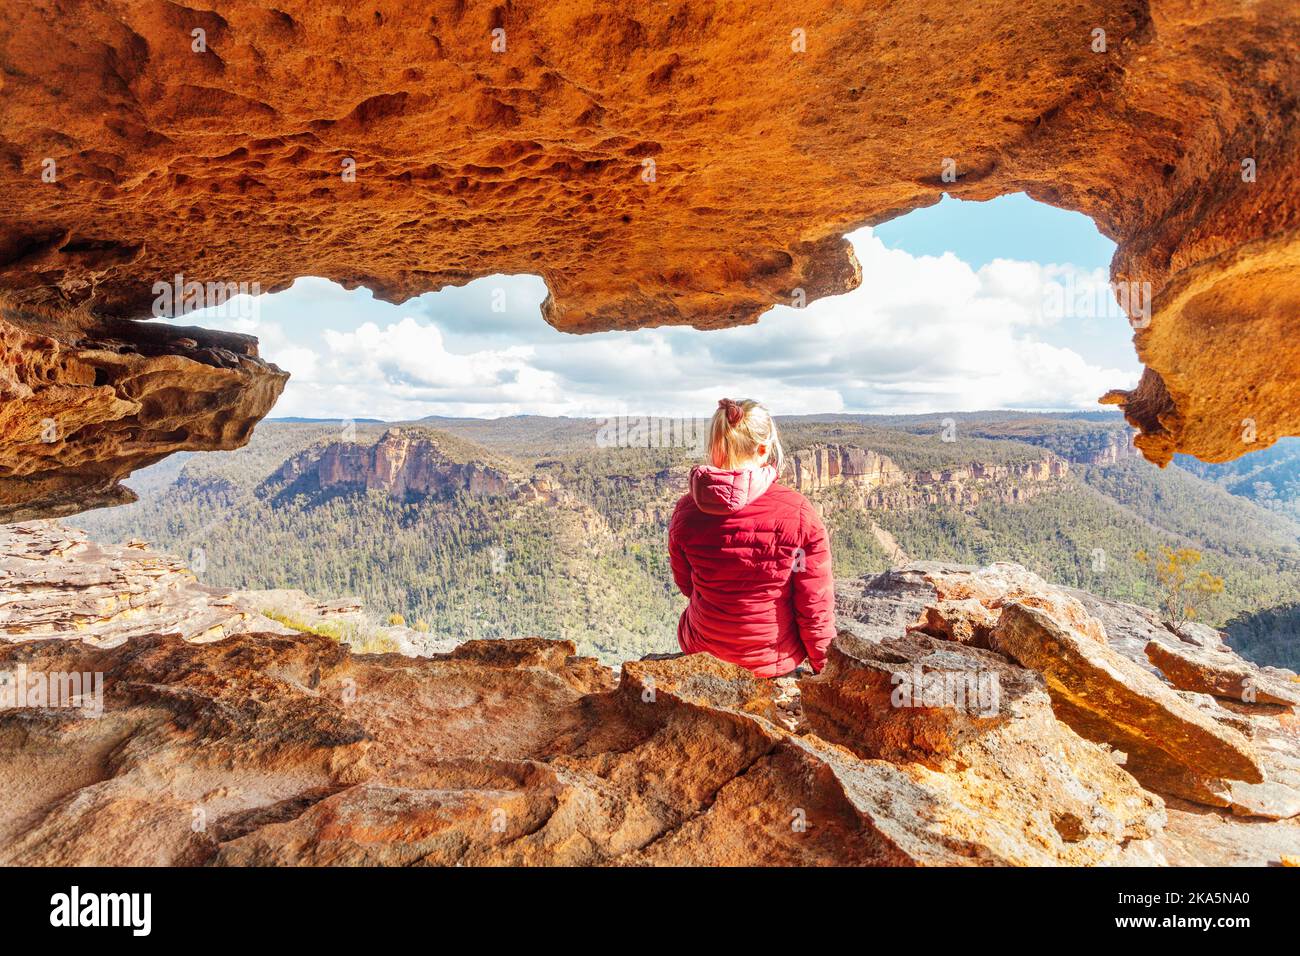 Woman sits in a sandstone  cave with spectacular mountain views Stock Photo